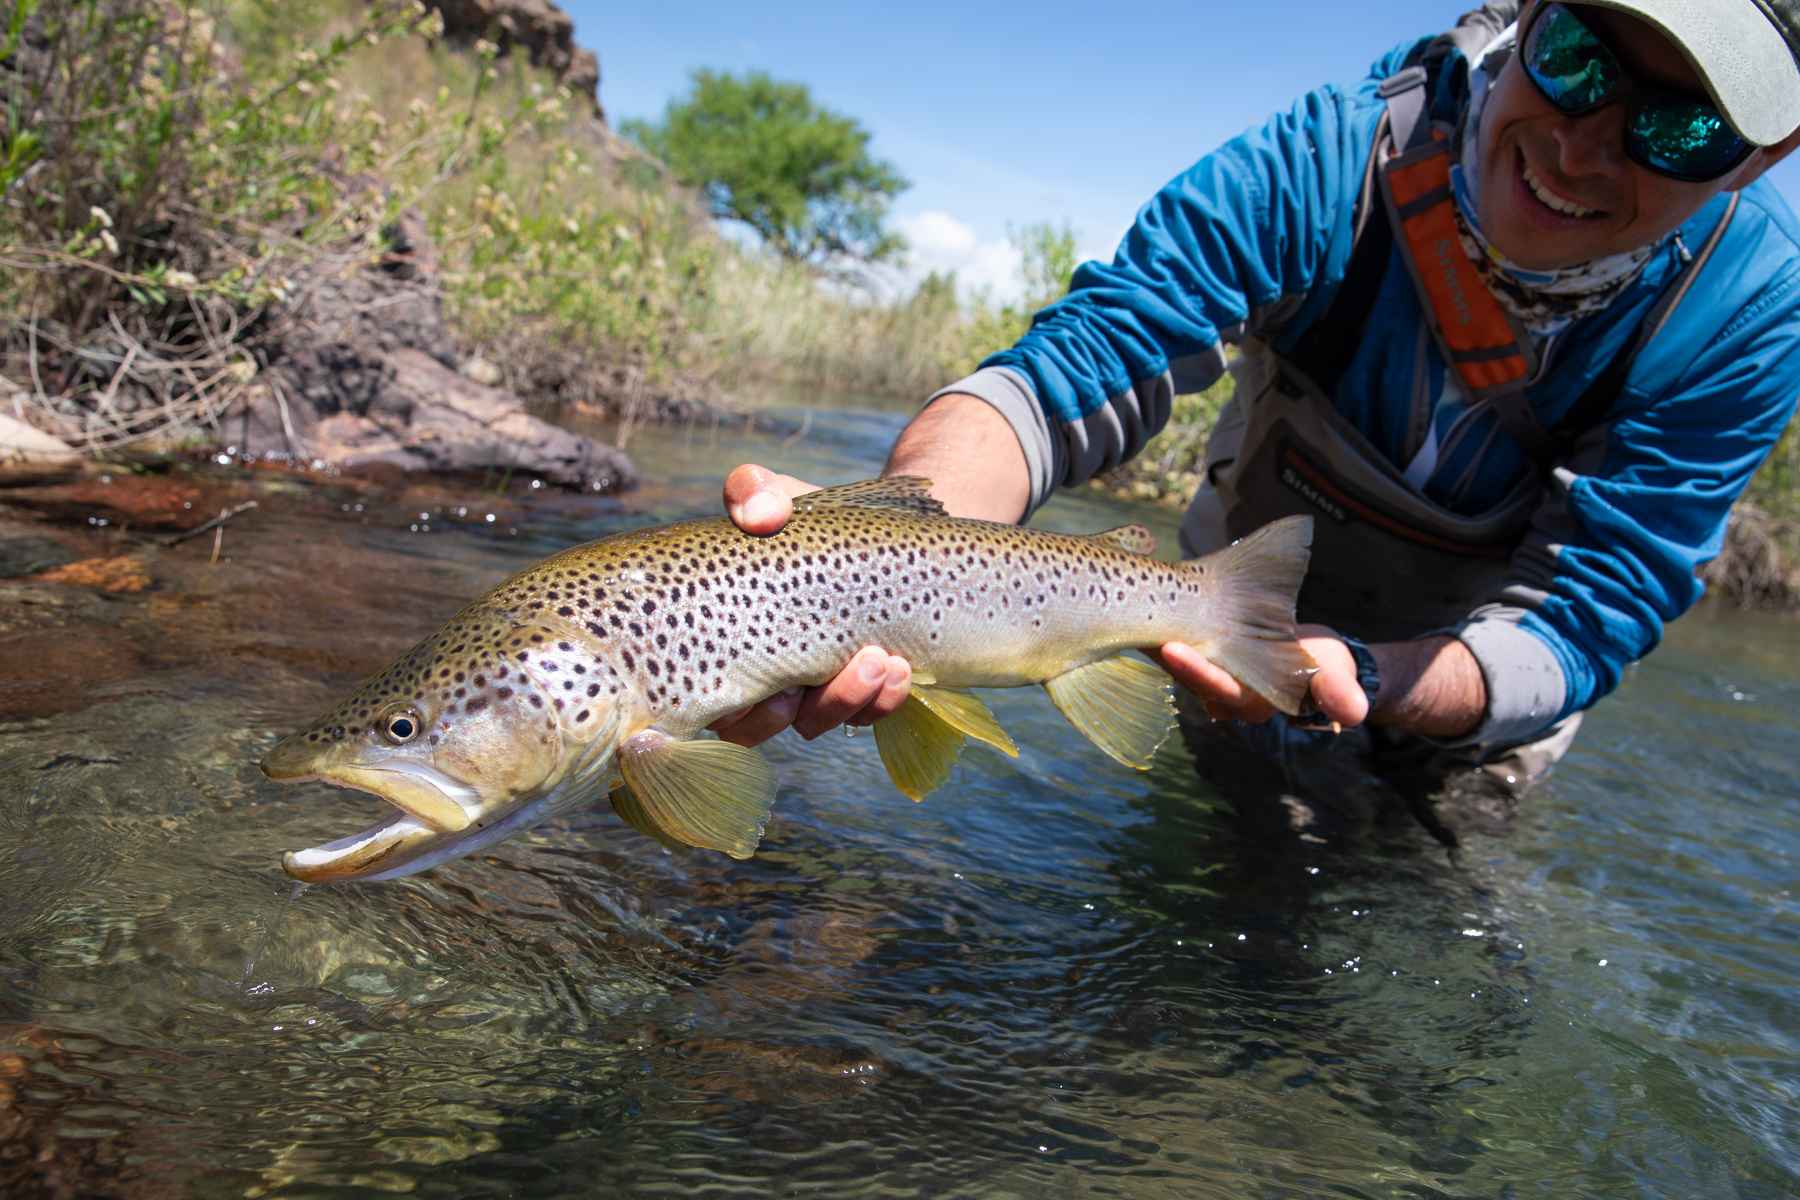 Is Fly Fishing Hard to Learn? - Guide Recommended